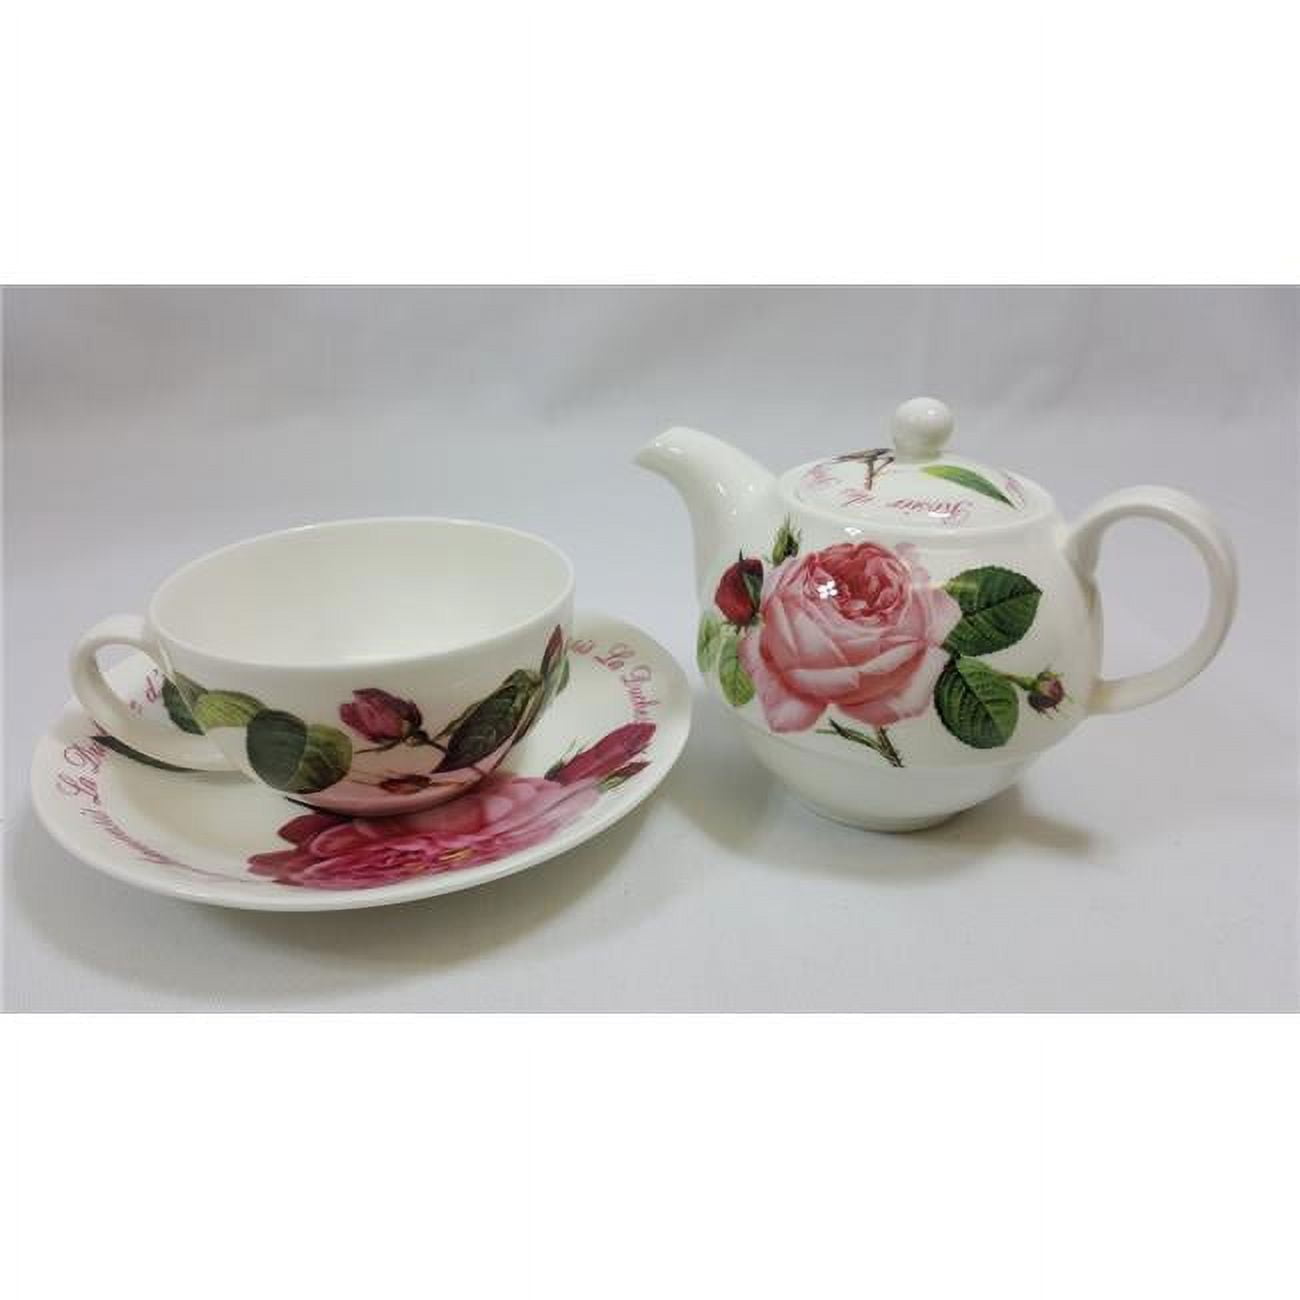 Picture of Roy Kirkham ER3004 Tea for One Teapot with Tea Cup and Saucer - Versailles